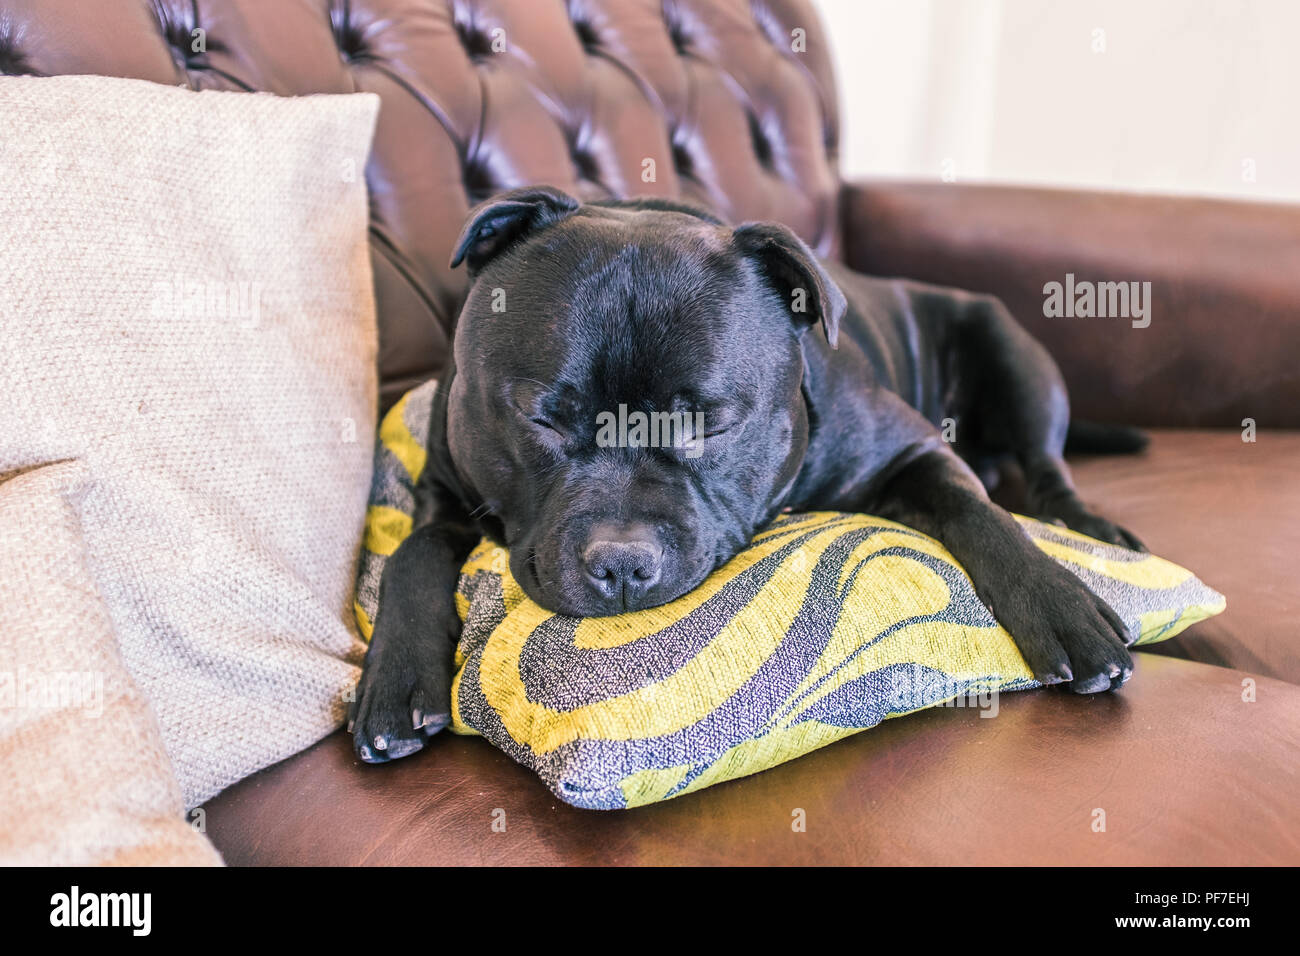 sleep,beautiful,furniture,leather,pets,terrier,young,adorable,animal,asleep,black,black brindle,brown,bull breed,calm,canine,corner,couch,curled,cushi Stock Photo